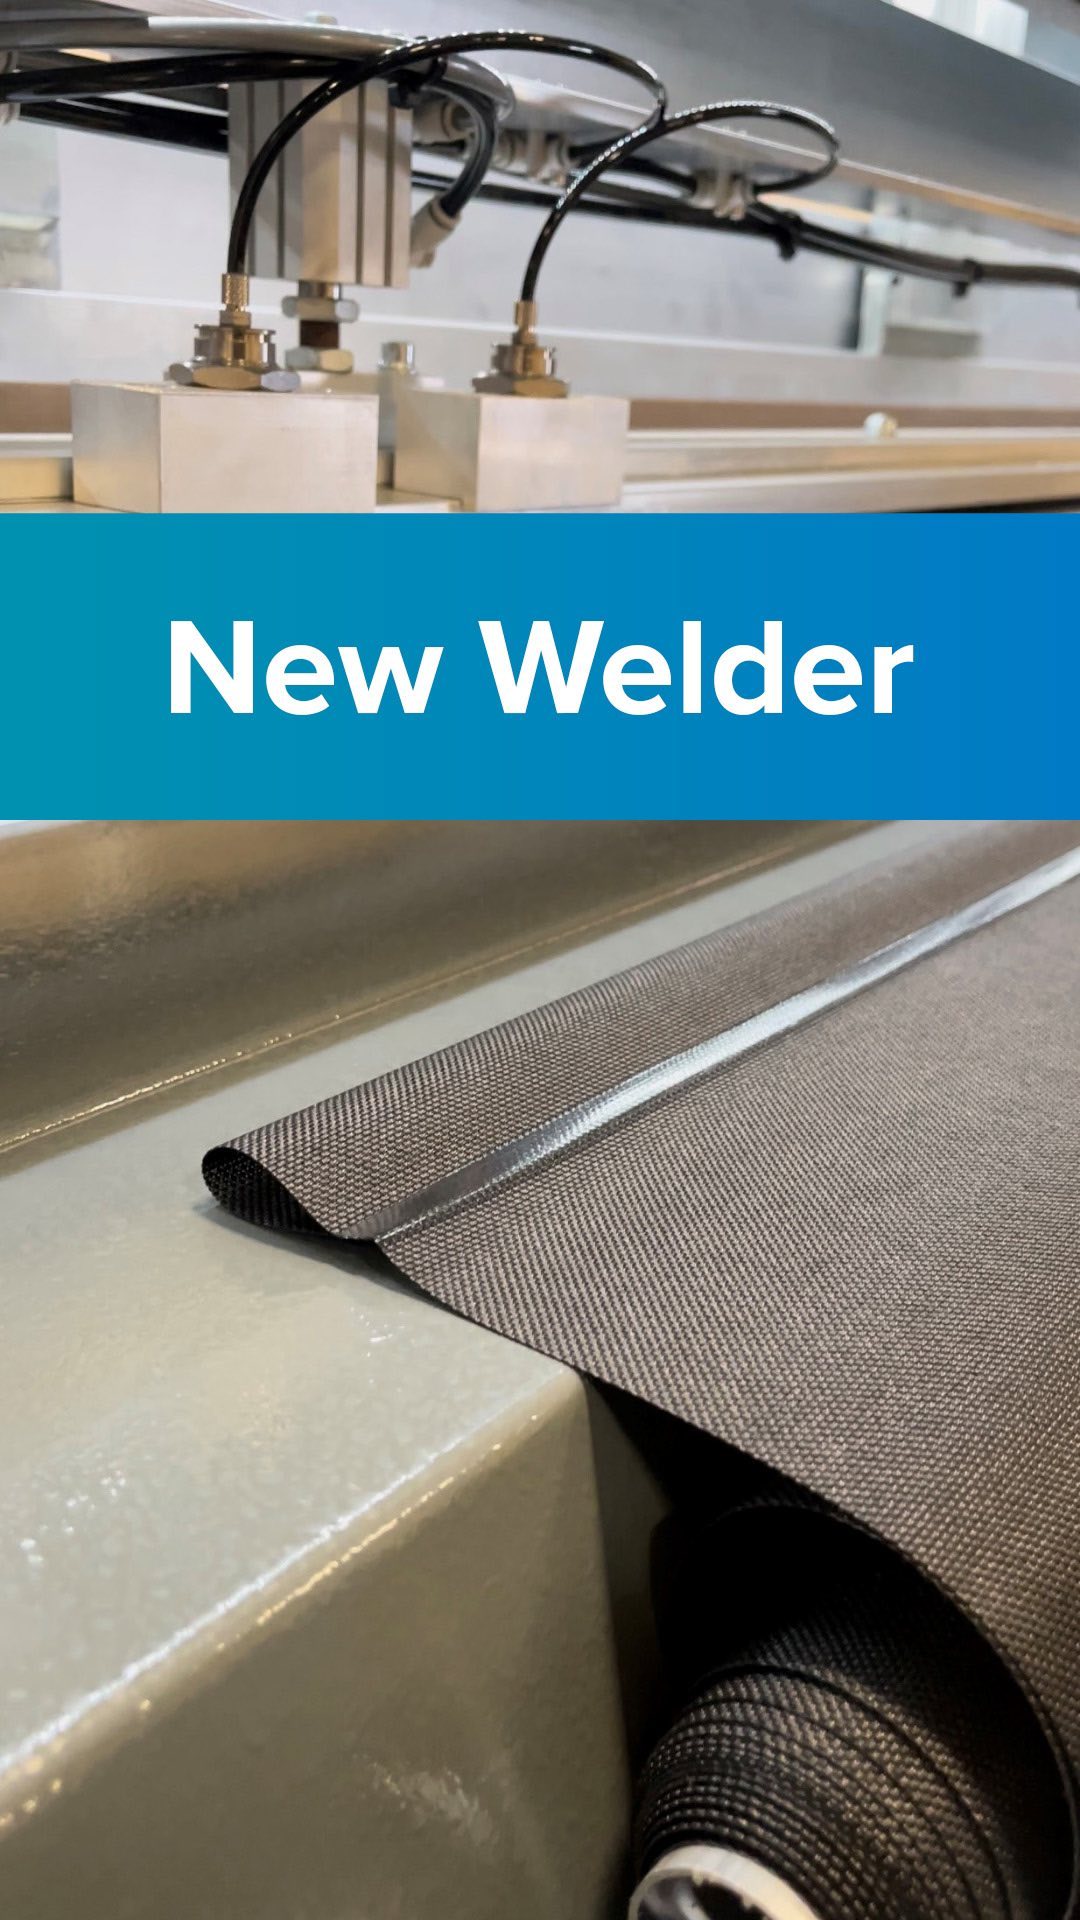 Our fully-automated, 251 inch, double-sided welder welds hembar, seams, and zipper shades. It eliminates long production times while improving product quality.
#RollAShade #rollershades #tech #technology #newtechnology #production #work #worklifebalance